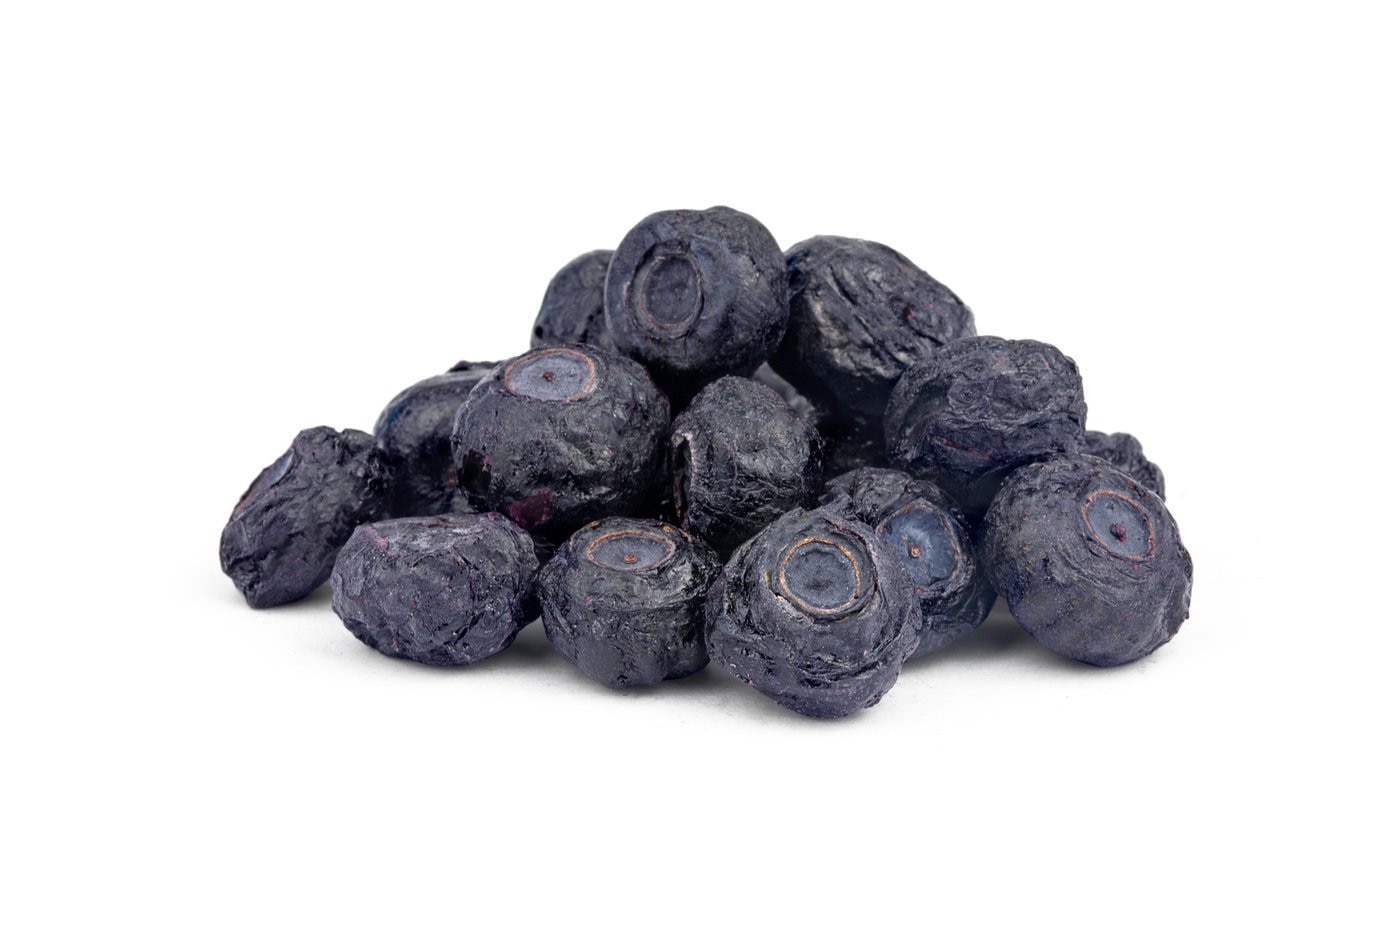 Freeze-Dried Blueberries image zoom